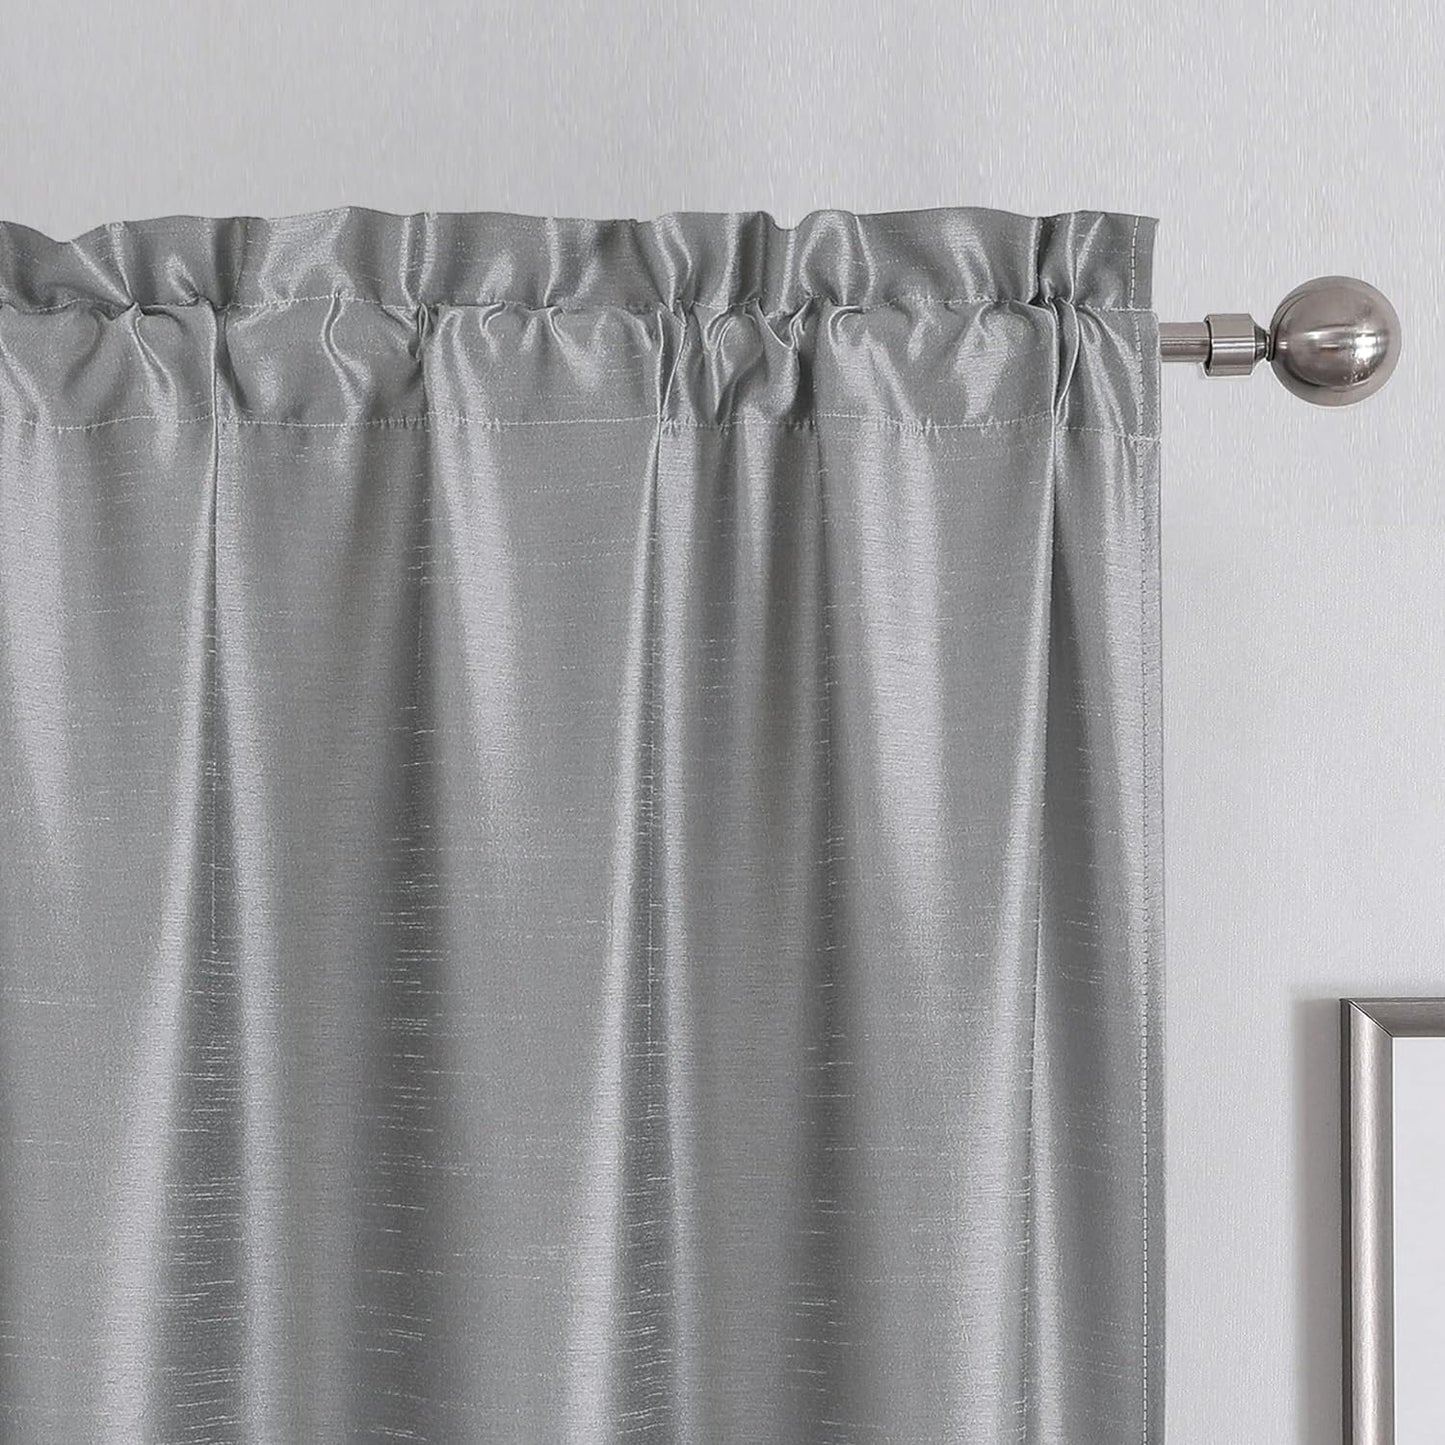 Chyhomenyc Uptown Sage Green Kitchen Curtains 45 Inch Length 2 Panels, Room Darkening Faux Silk Chic Fabric Short Window Curtains for Bedroom Living Room, Each 30Wx45L  Chyhomenyc Silver Gray 2X40"Wx72"L 